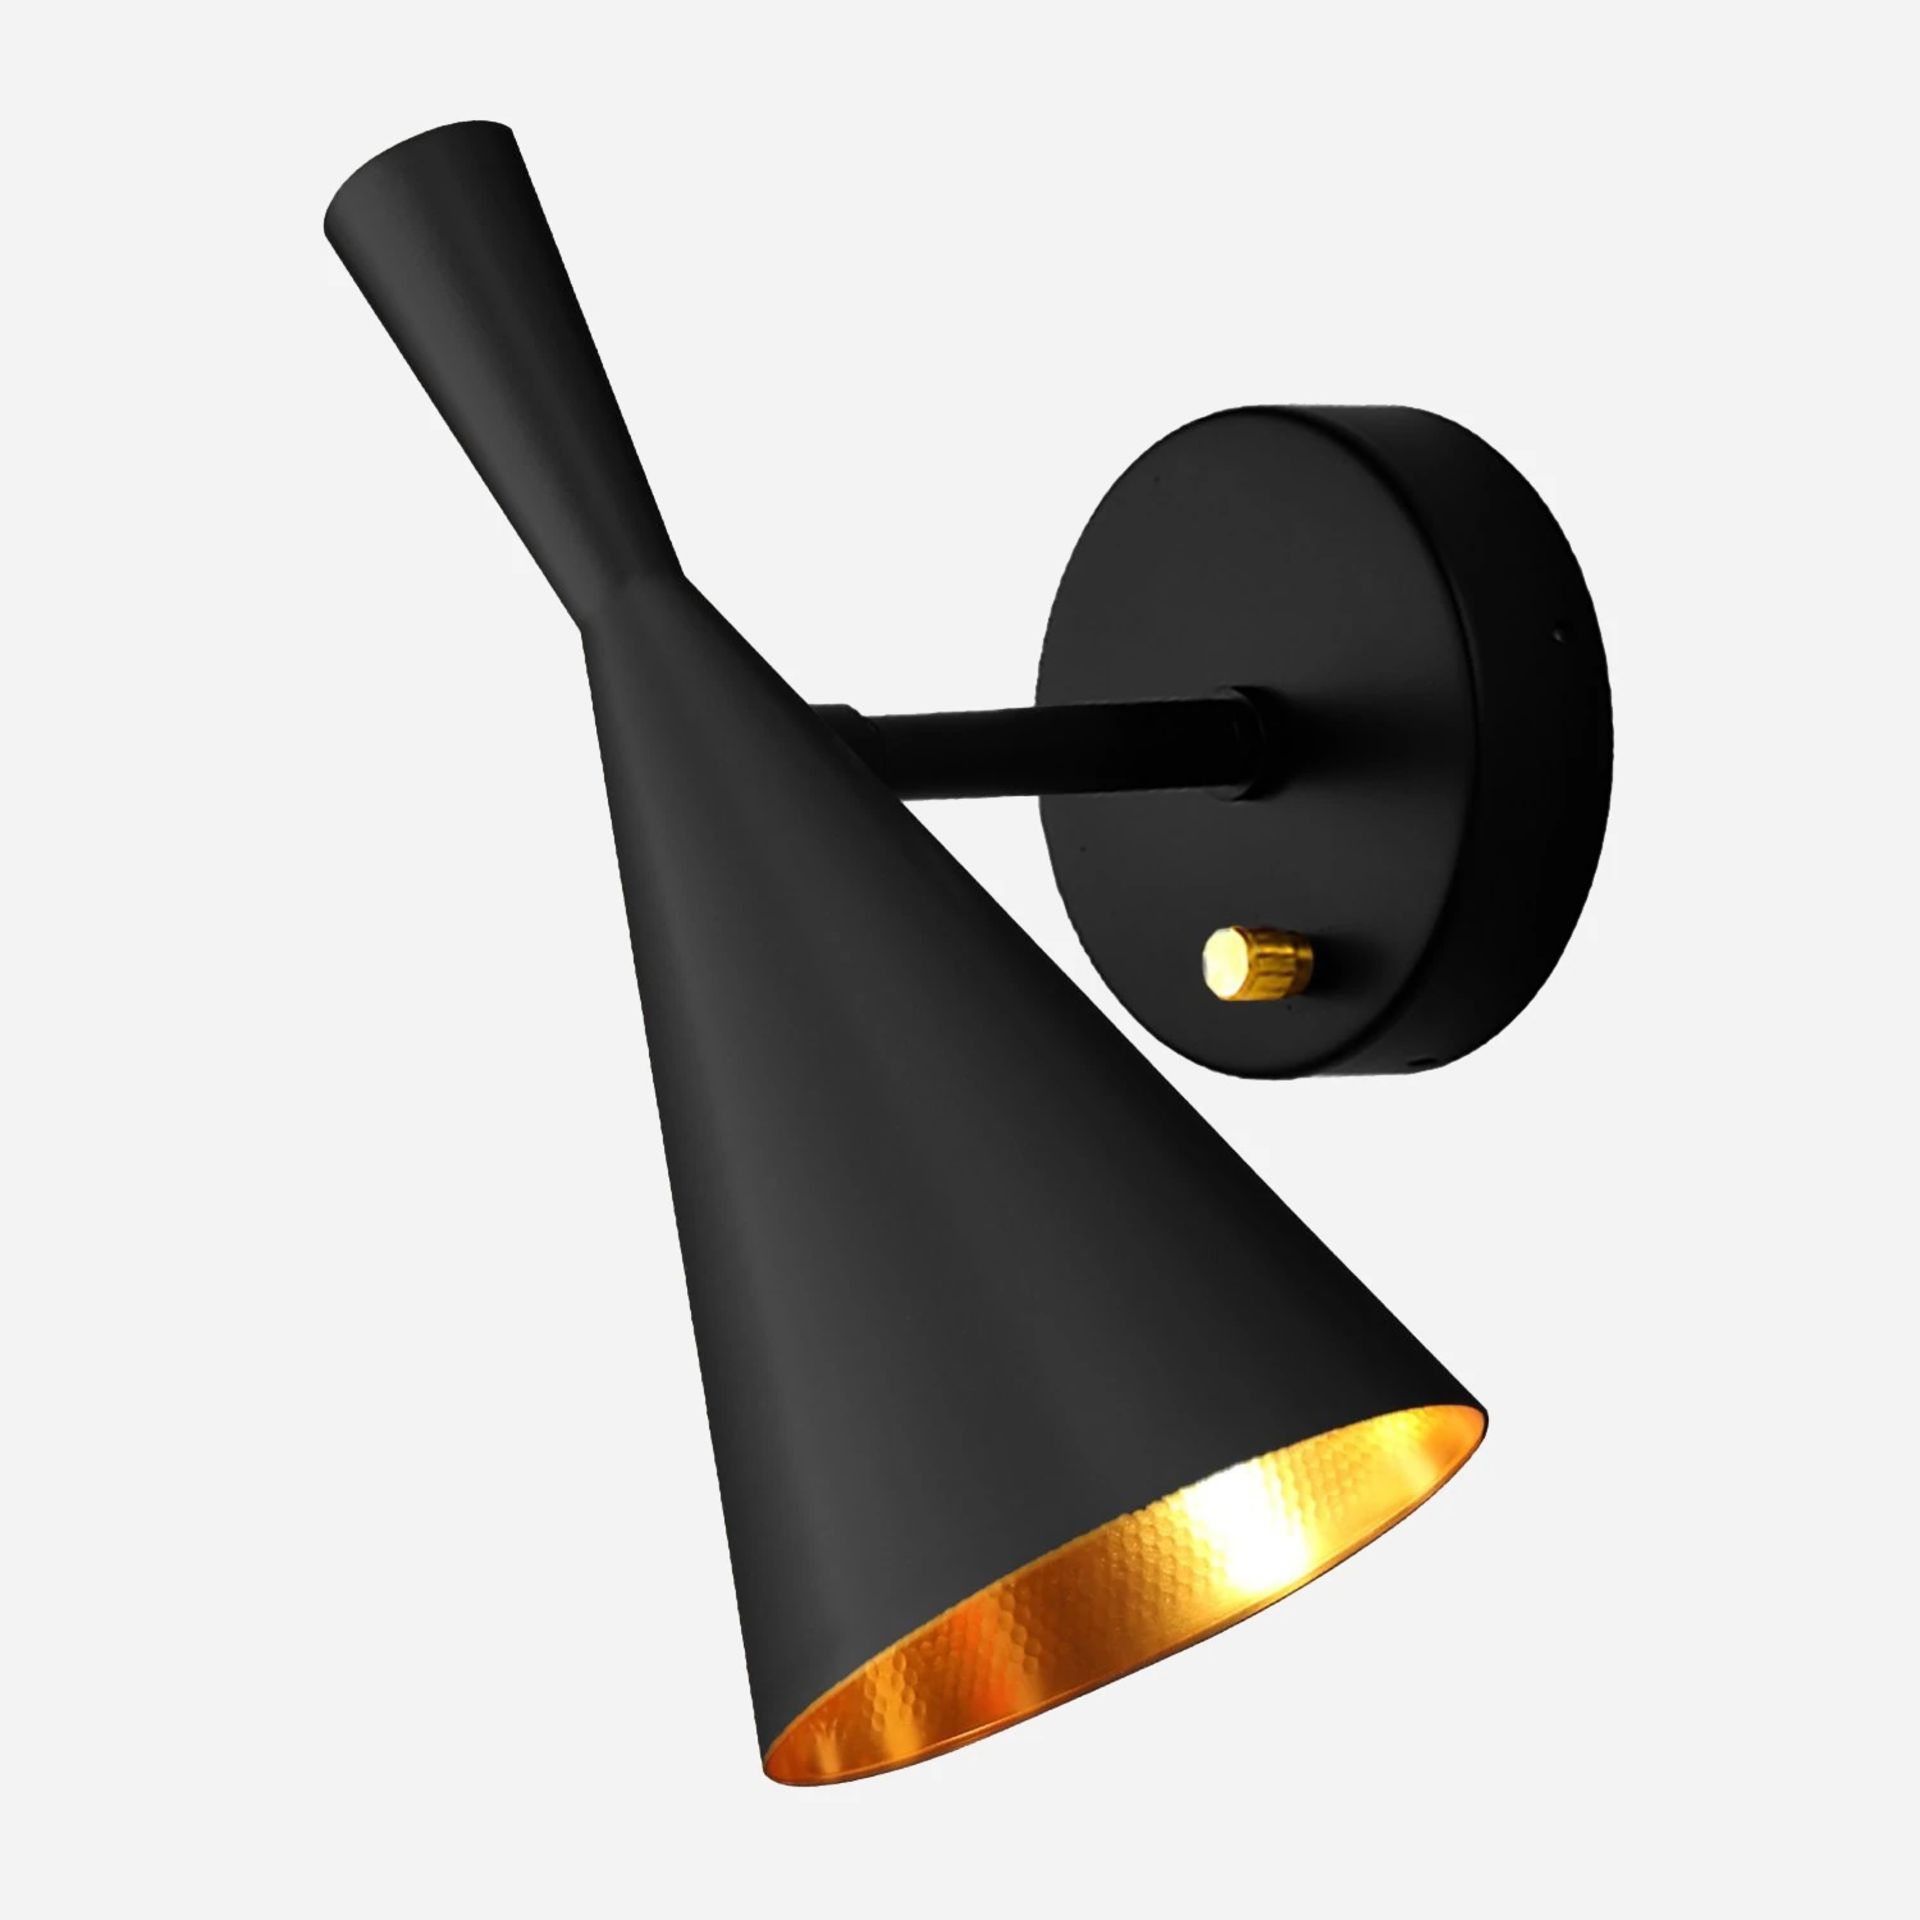 Funk Wall Light Black A sleek range for contemporary living, The Funk Wall Light is inspired by